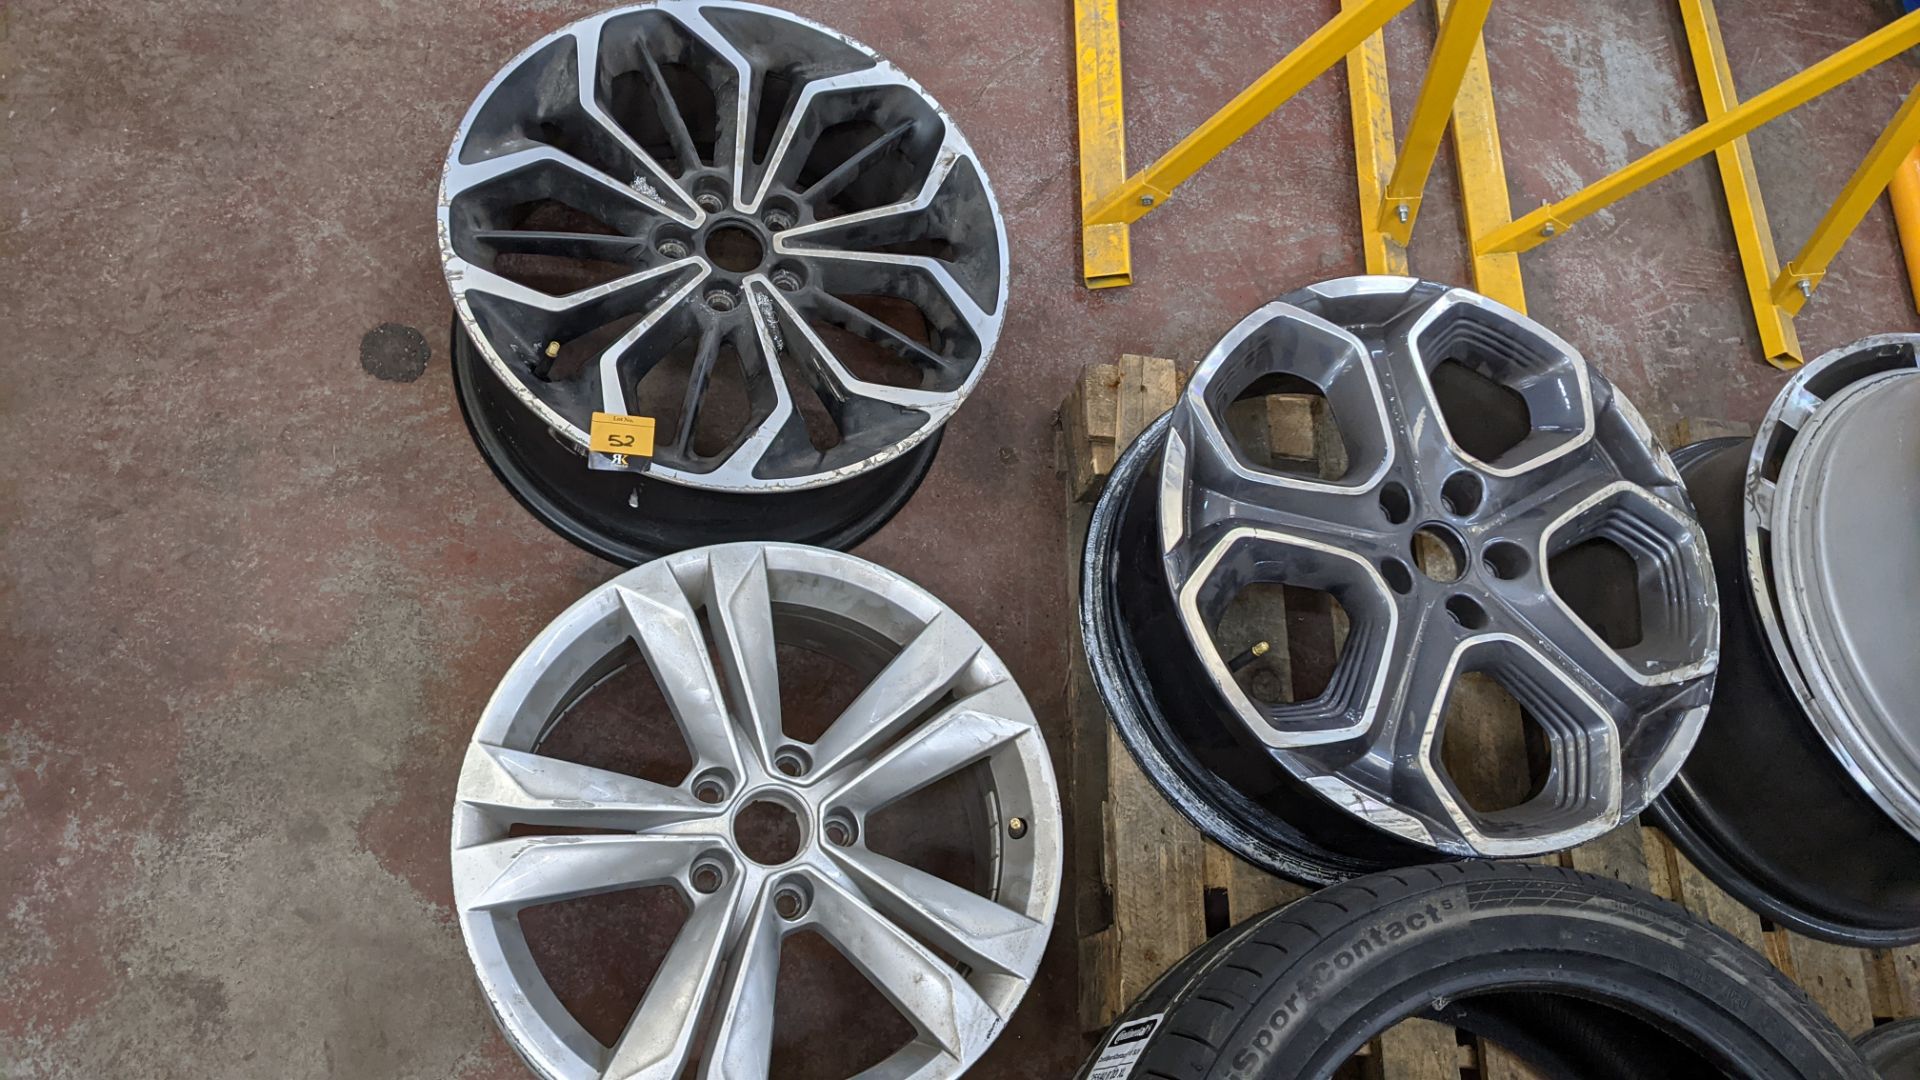 5 off assorted alloy wheels - Image 5 of 9